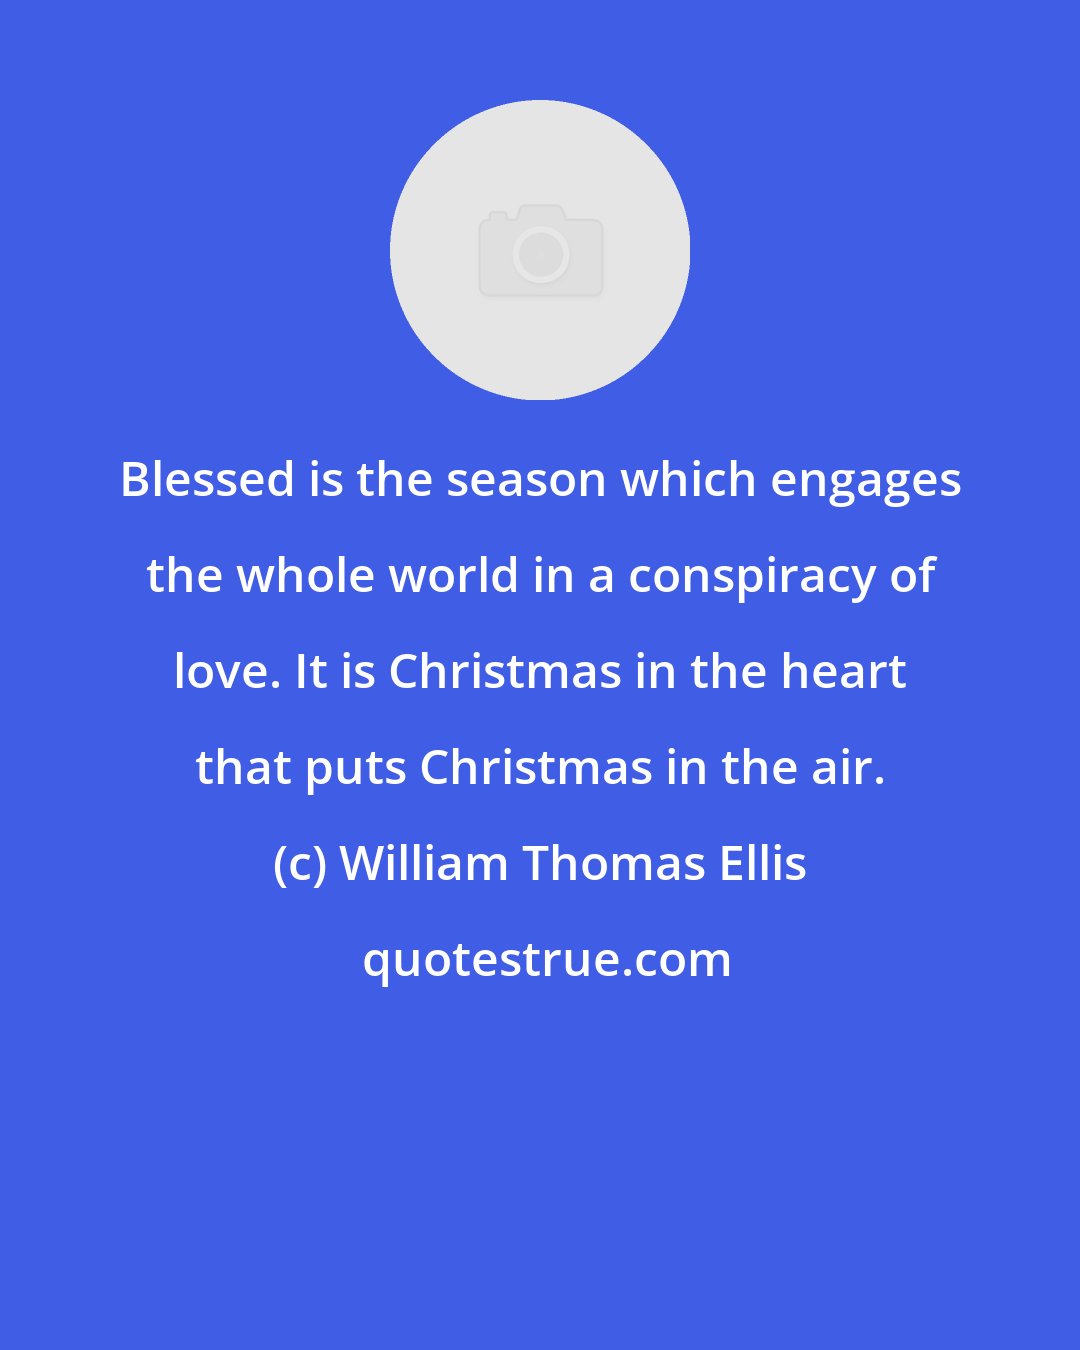 William Thomas Ellis: Blessed is the season which engages the whole world in a conspiracy of love. It is Christmas in the heart that puts Christmas in the air.